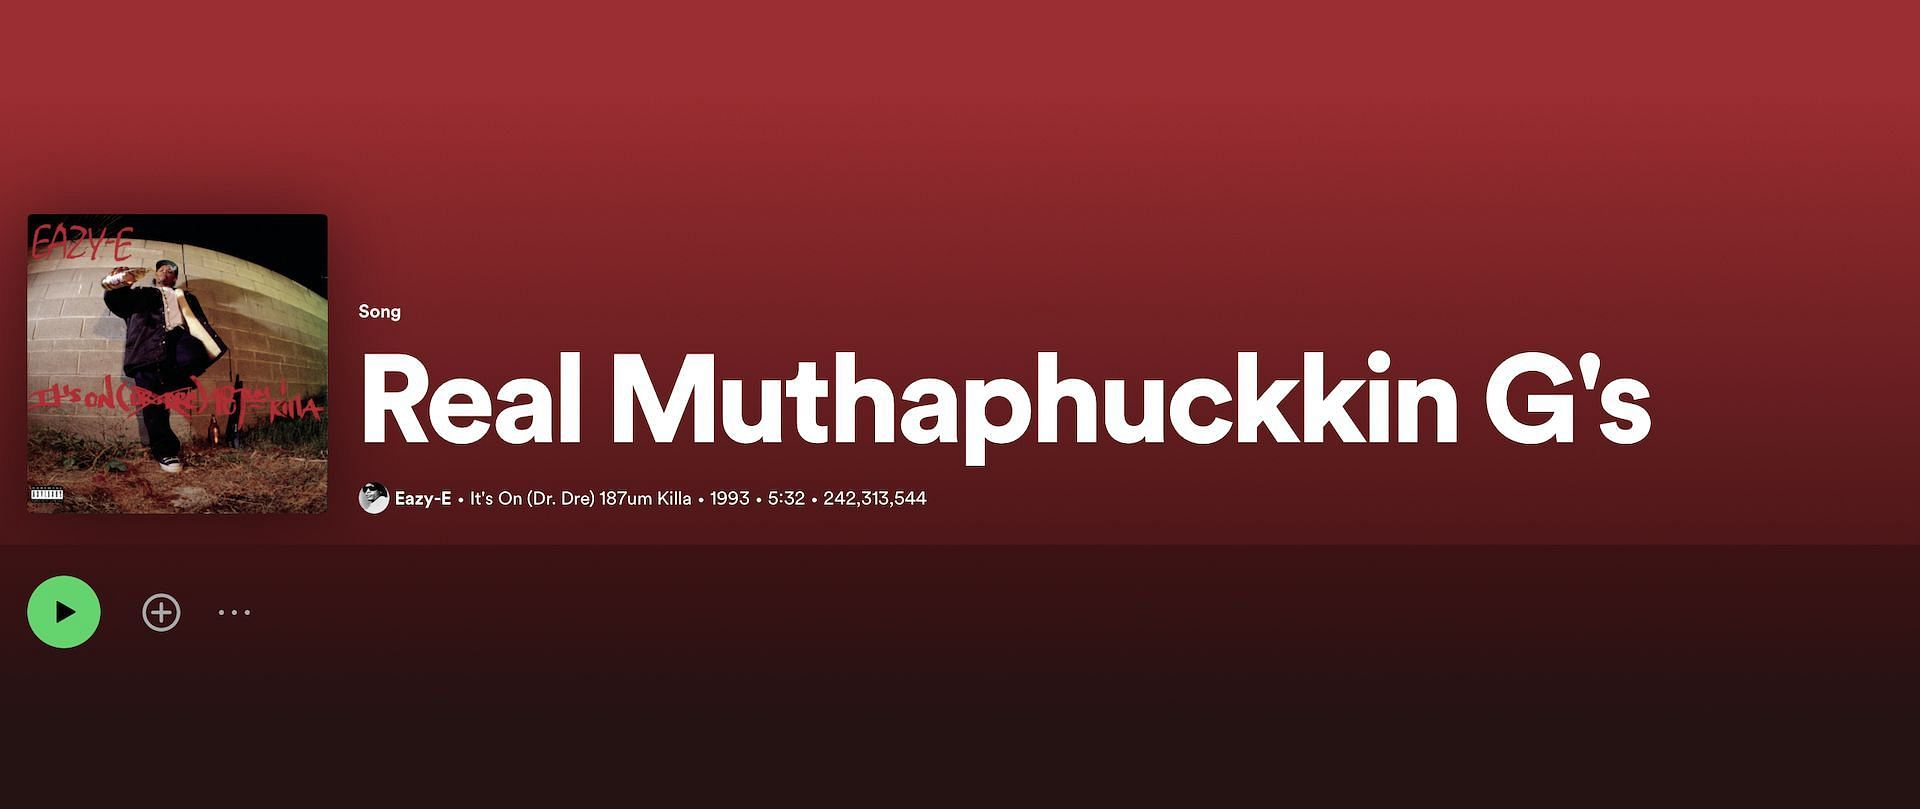 Eazy E&#039;s record titled &#039;Real Muthaphuckkin G&#039;s&#039; (Image via Spotify)